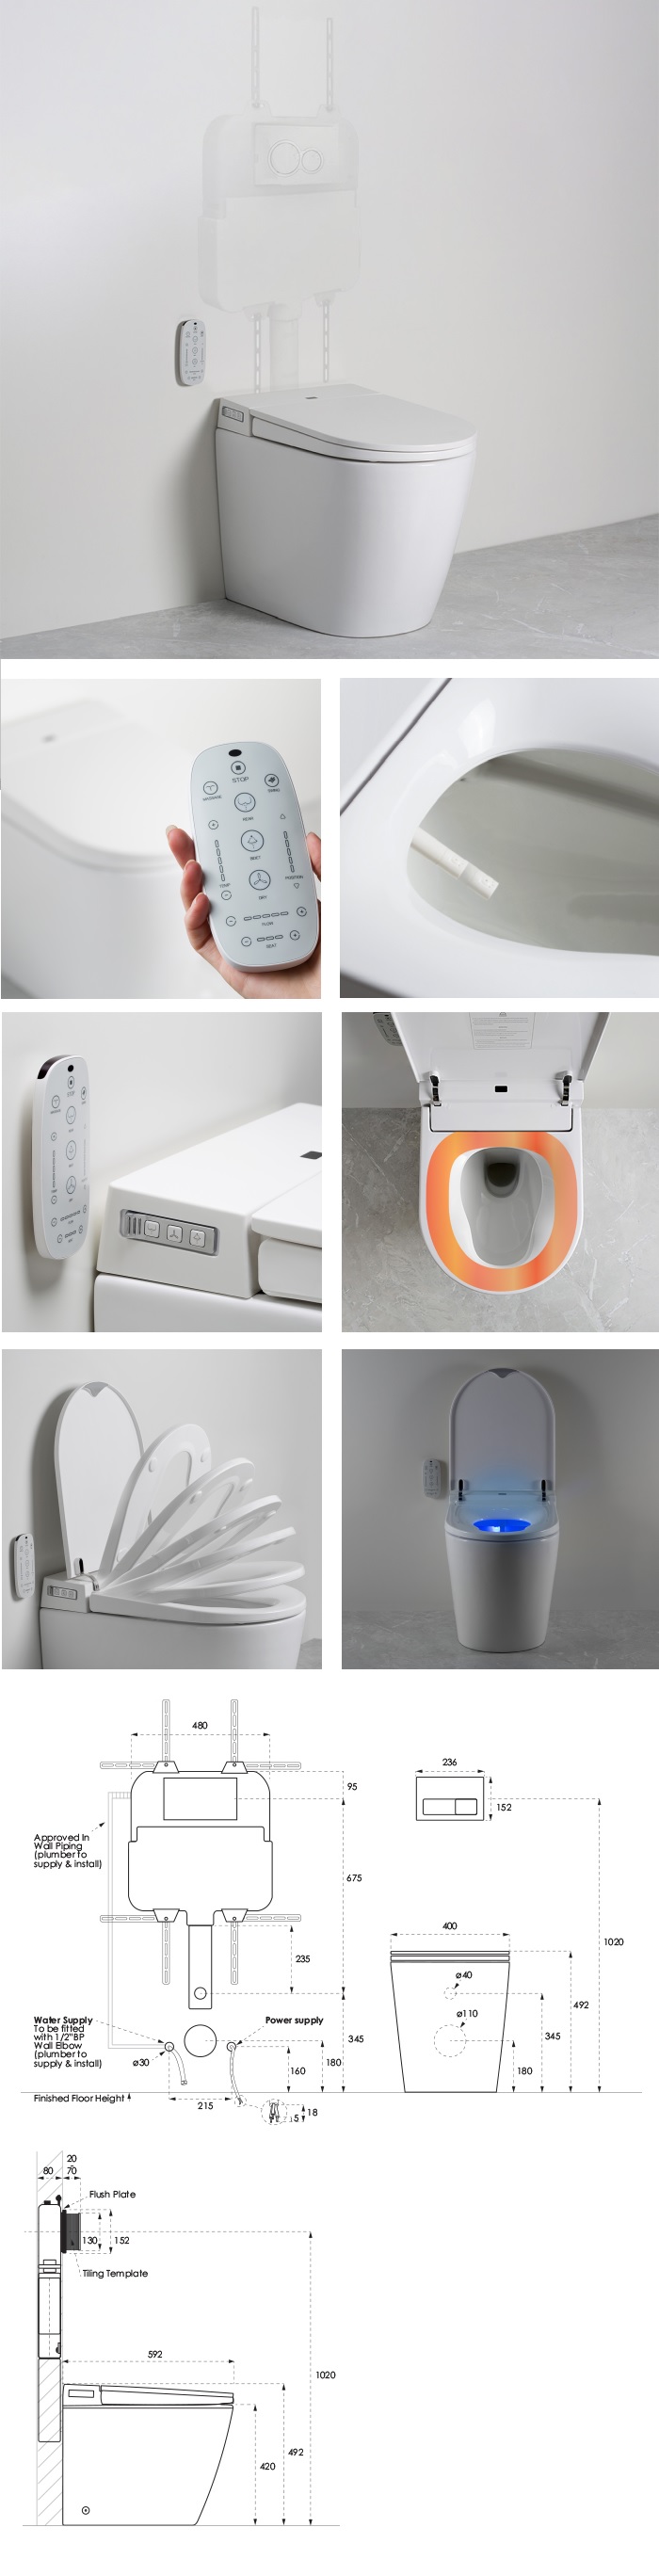 Argent Evo Wall Faced Smart Toilet System specifications